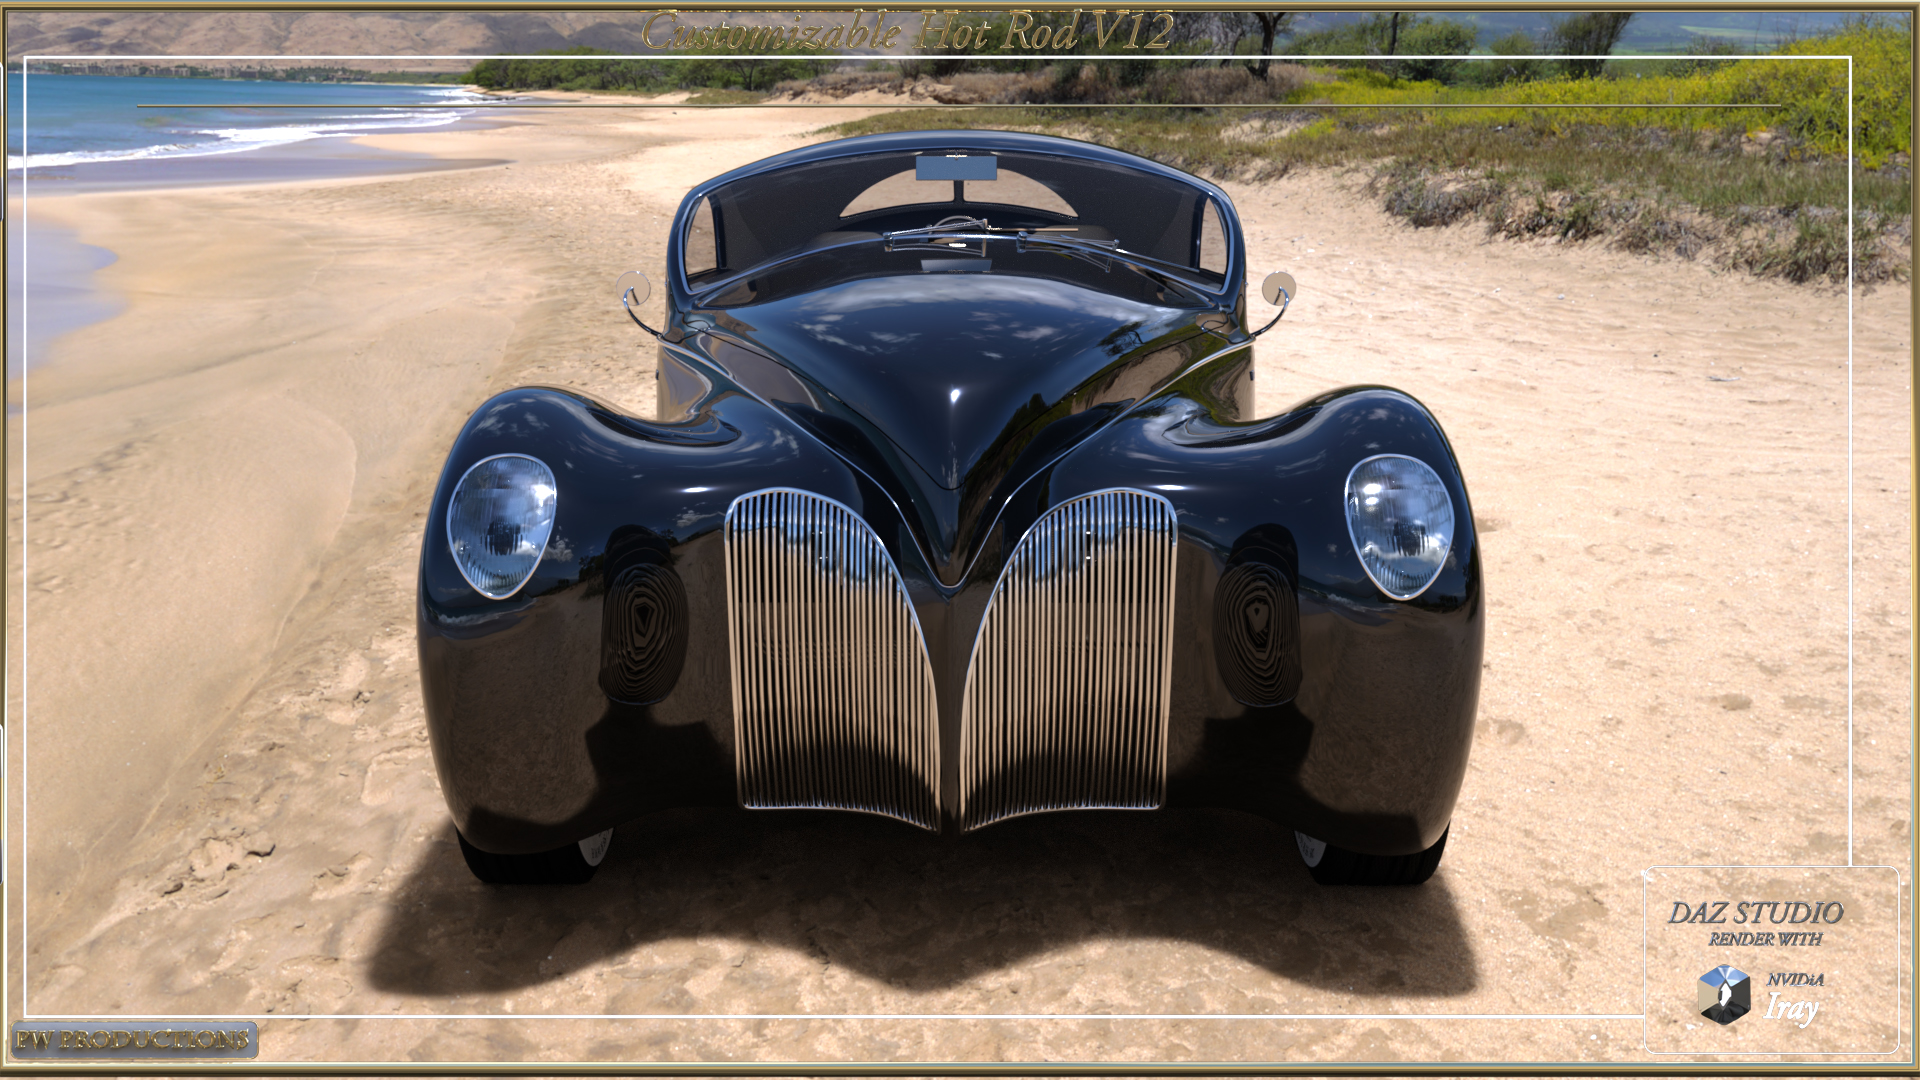 PW Customizable Hot Rod V12 by: PW Productions, 3D Models by Daz 3D